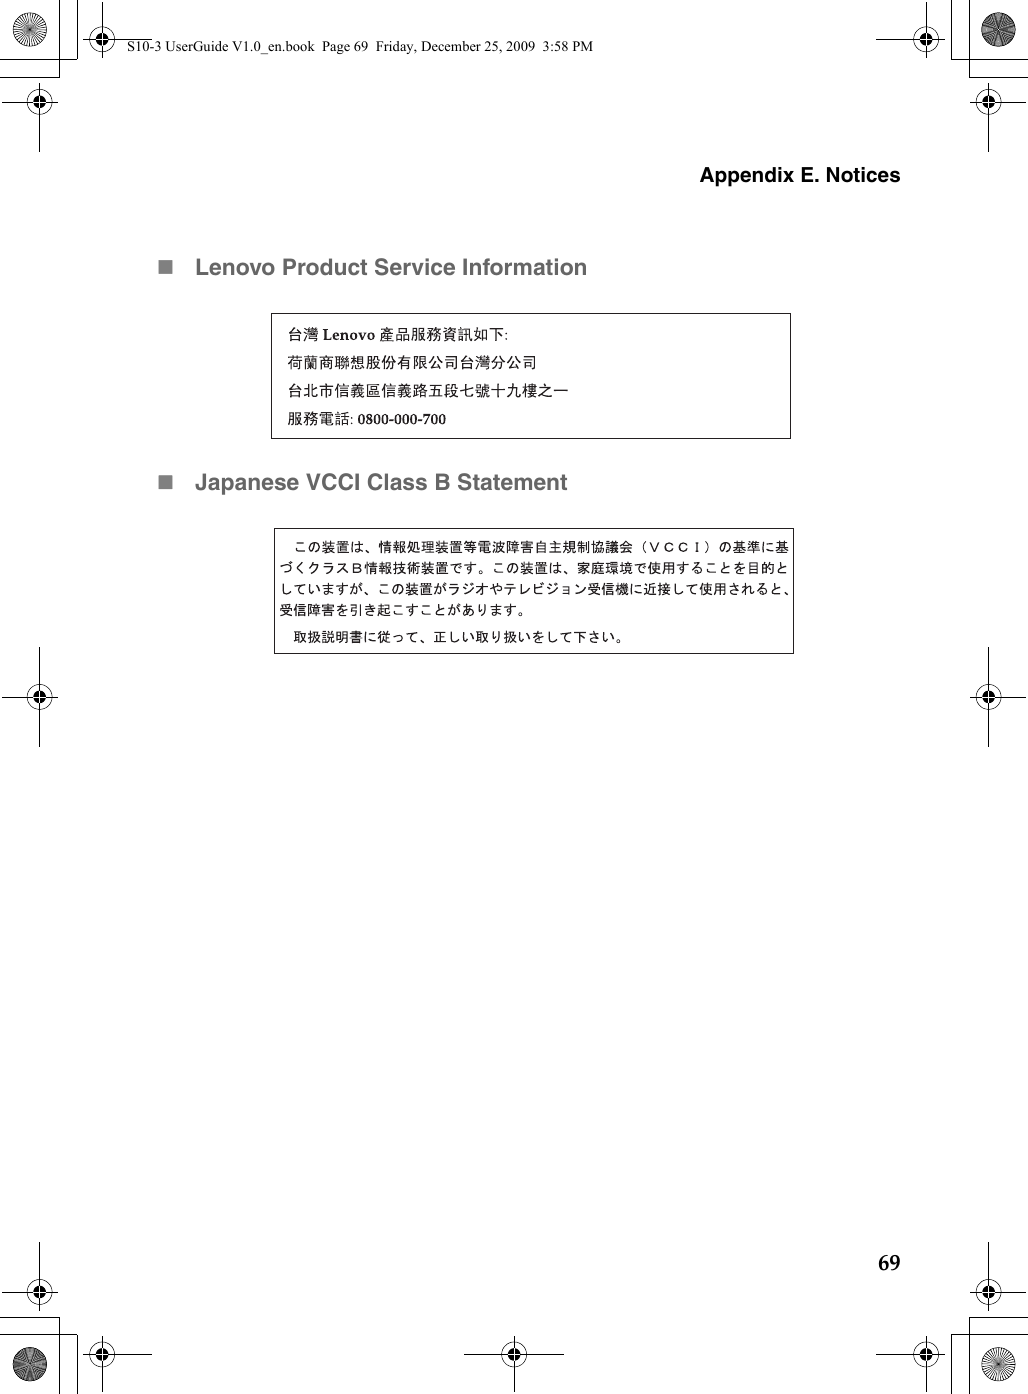 Appendix E. Notices69Lenovo Product Service InformationJapanese VCCI Class B StatementS10-3 UserGuide V1.0_en.book  Page 69  Friday, December 25, 2009  3:58 PM